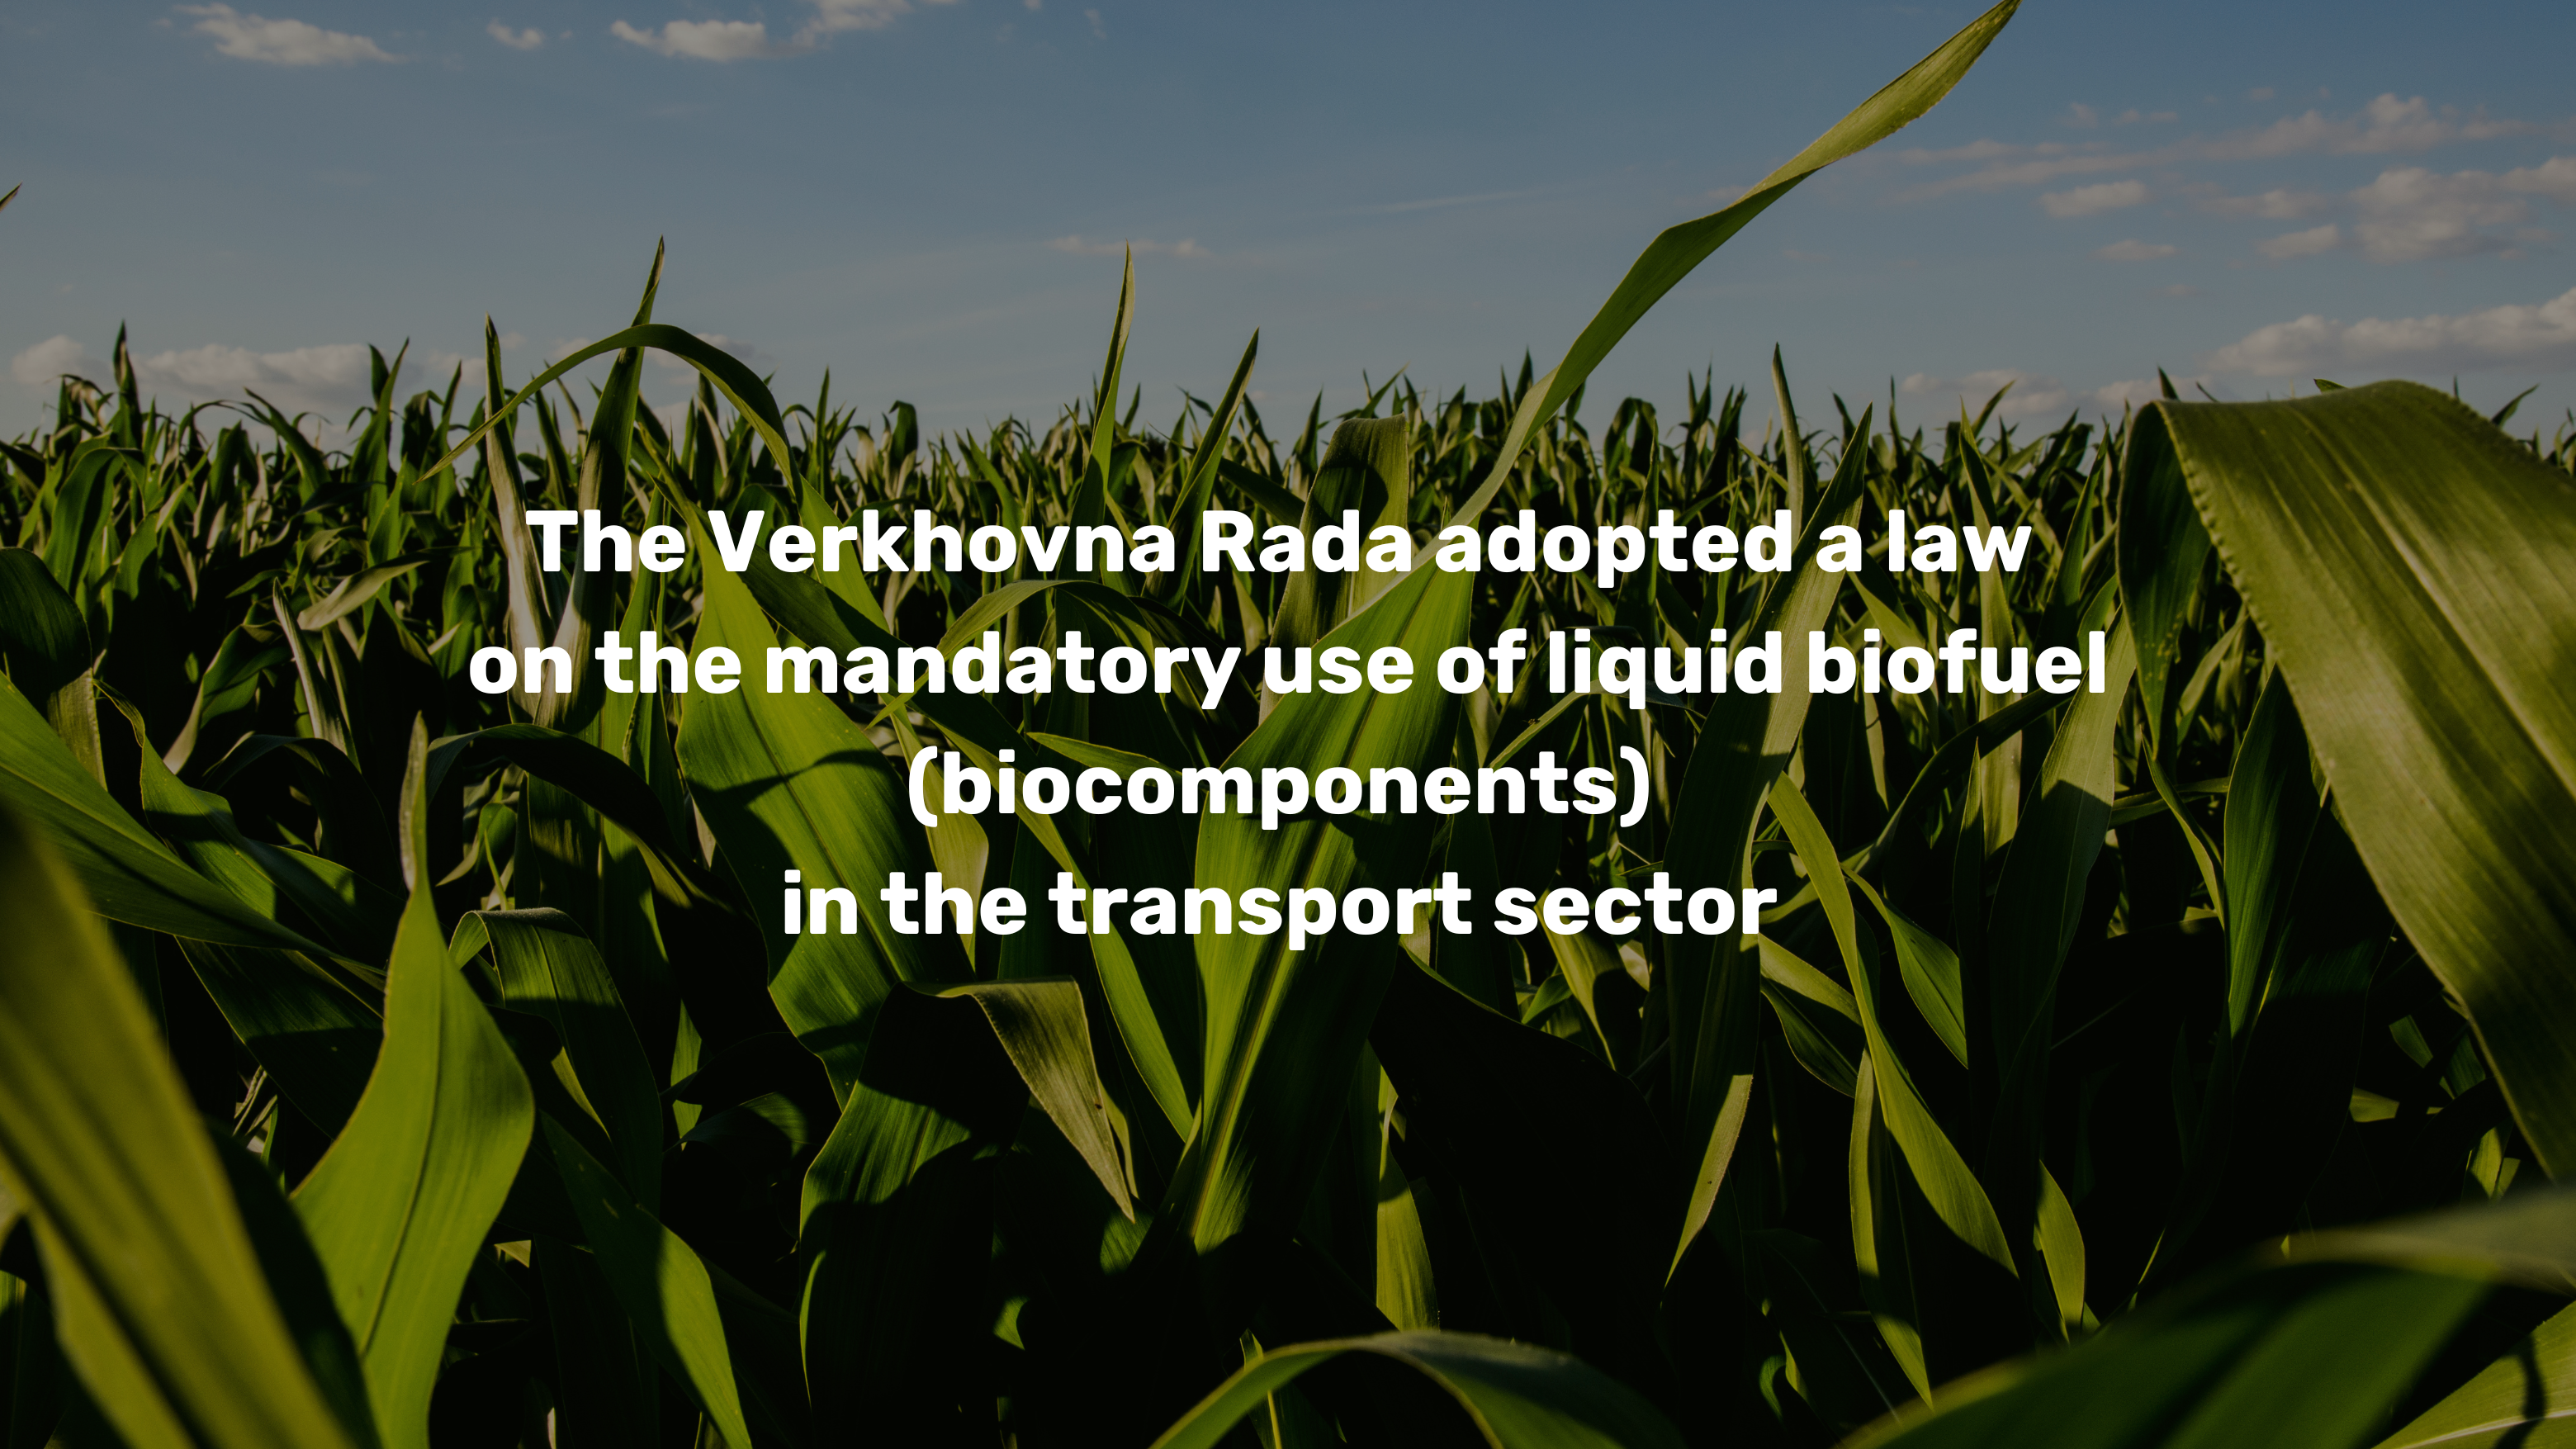 Law mandating the use of liquid biofuels in the transport